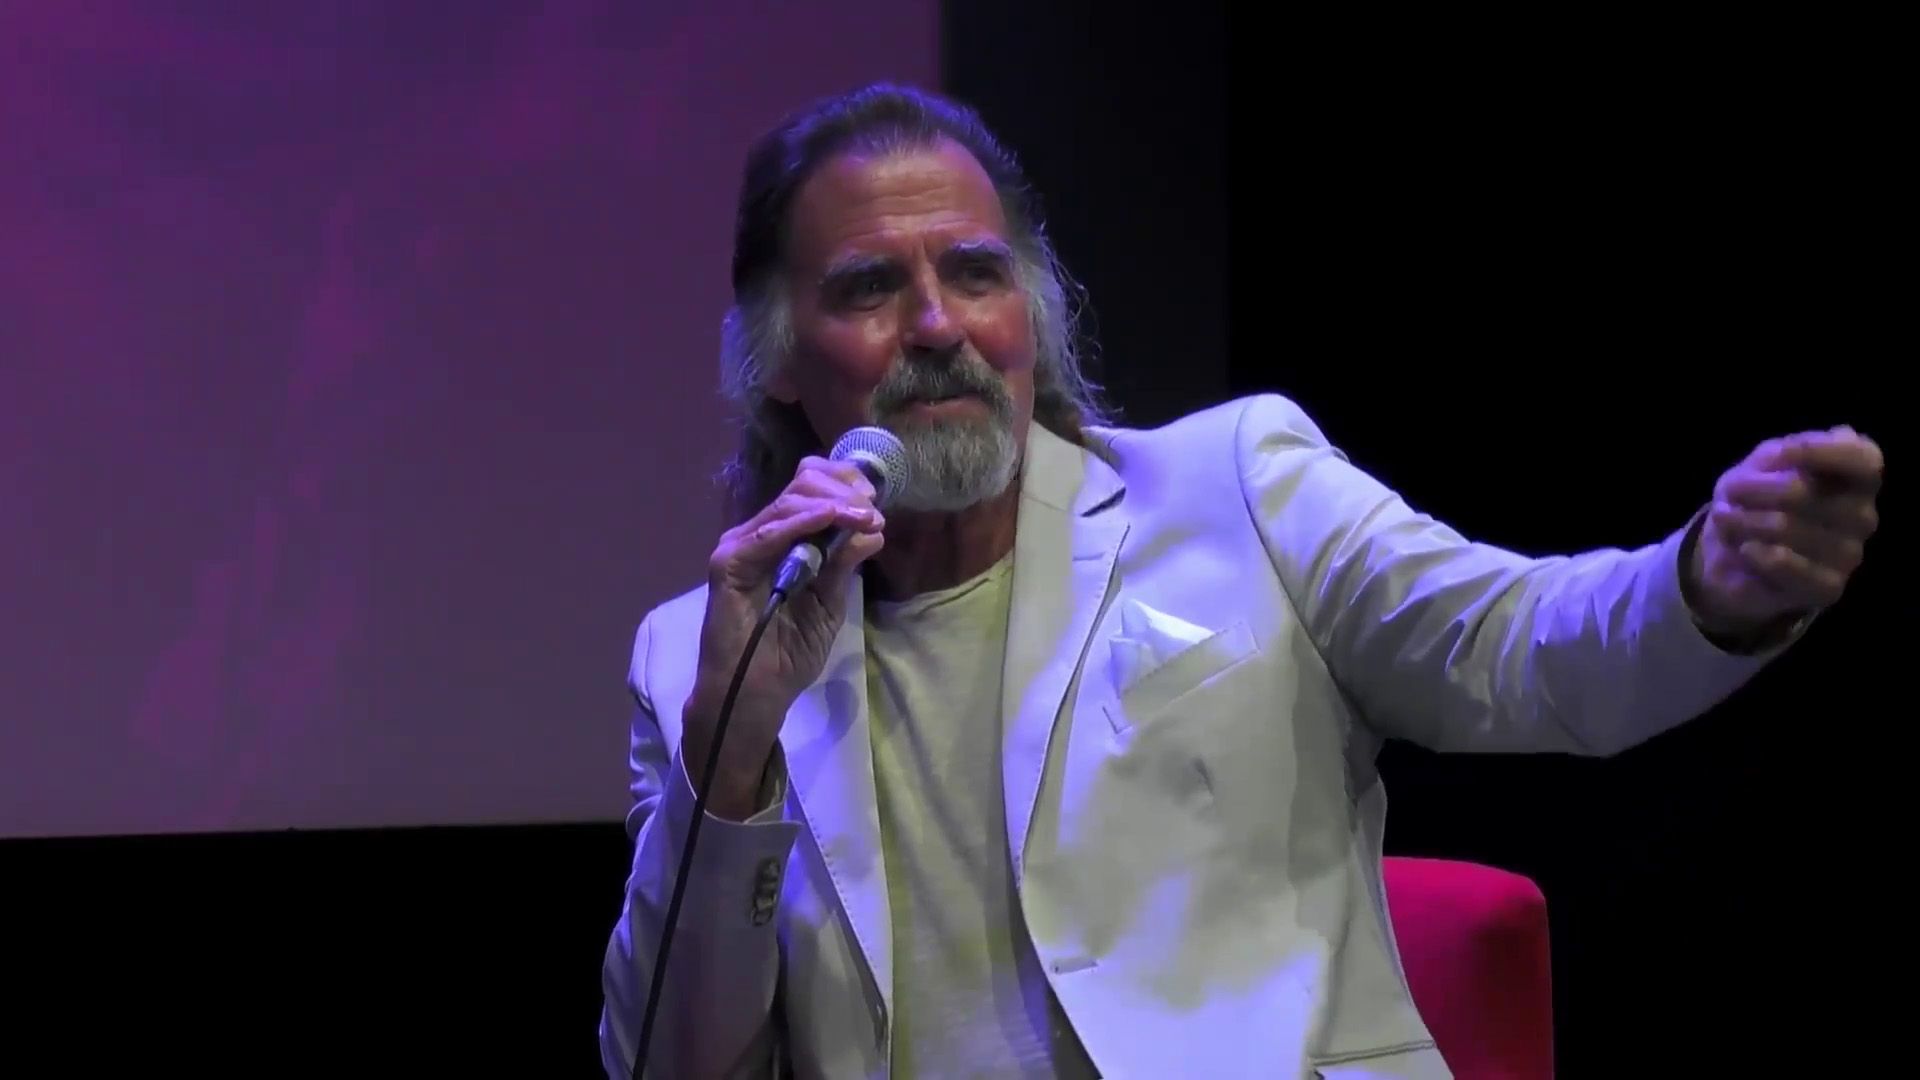 A conversation with Jeff Fahey